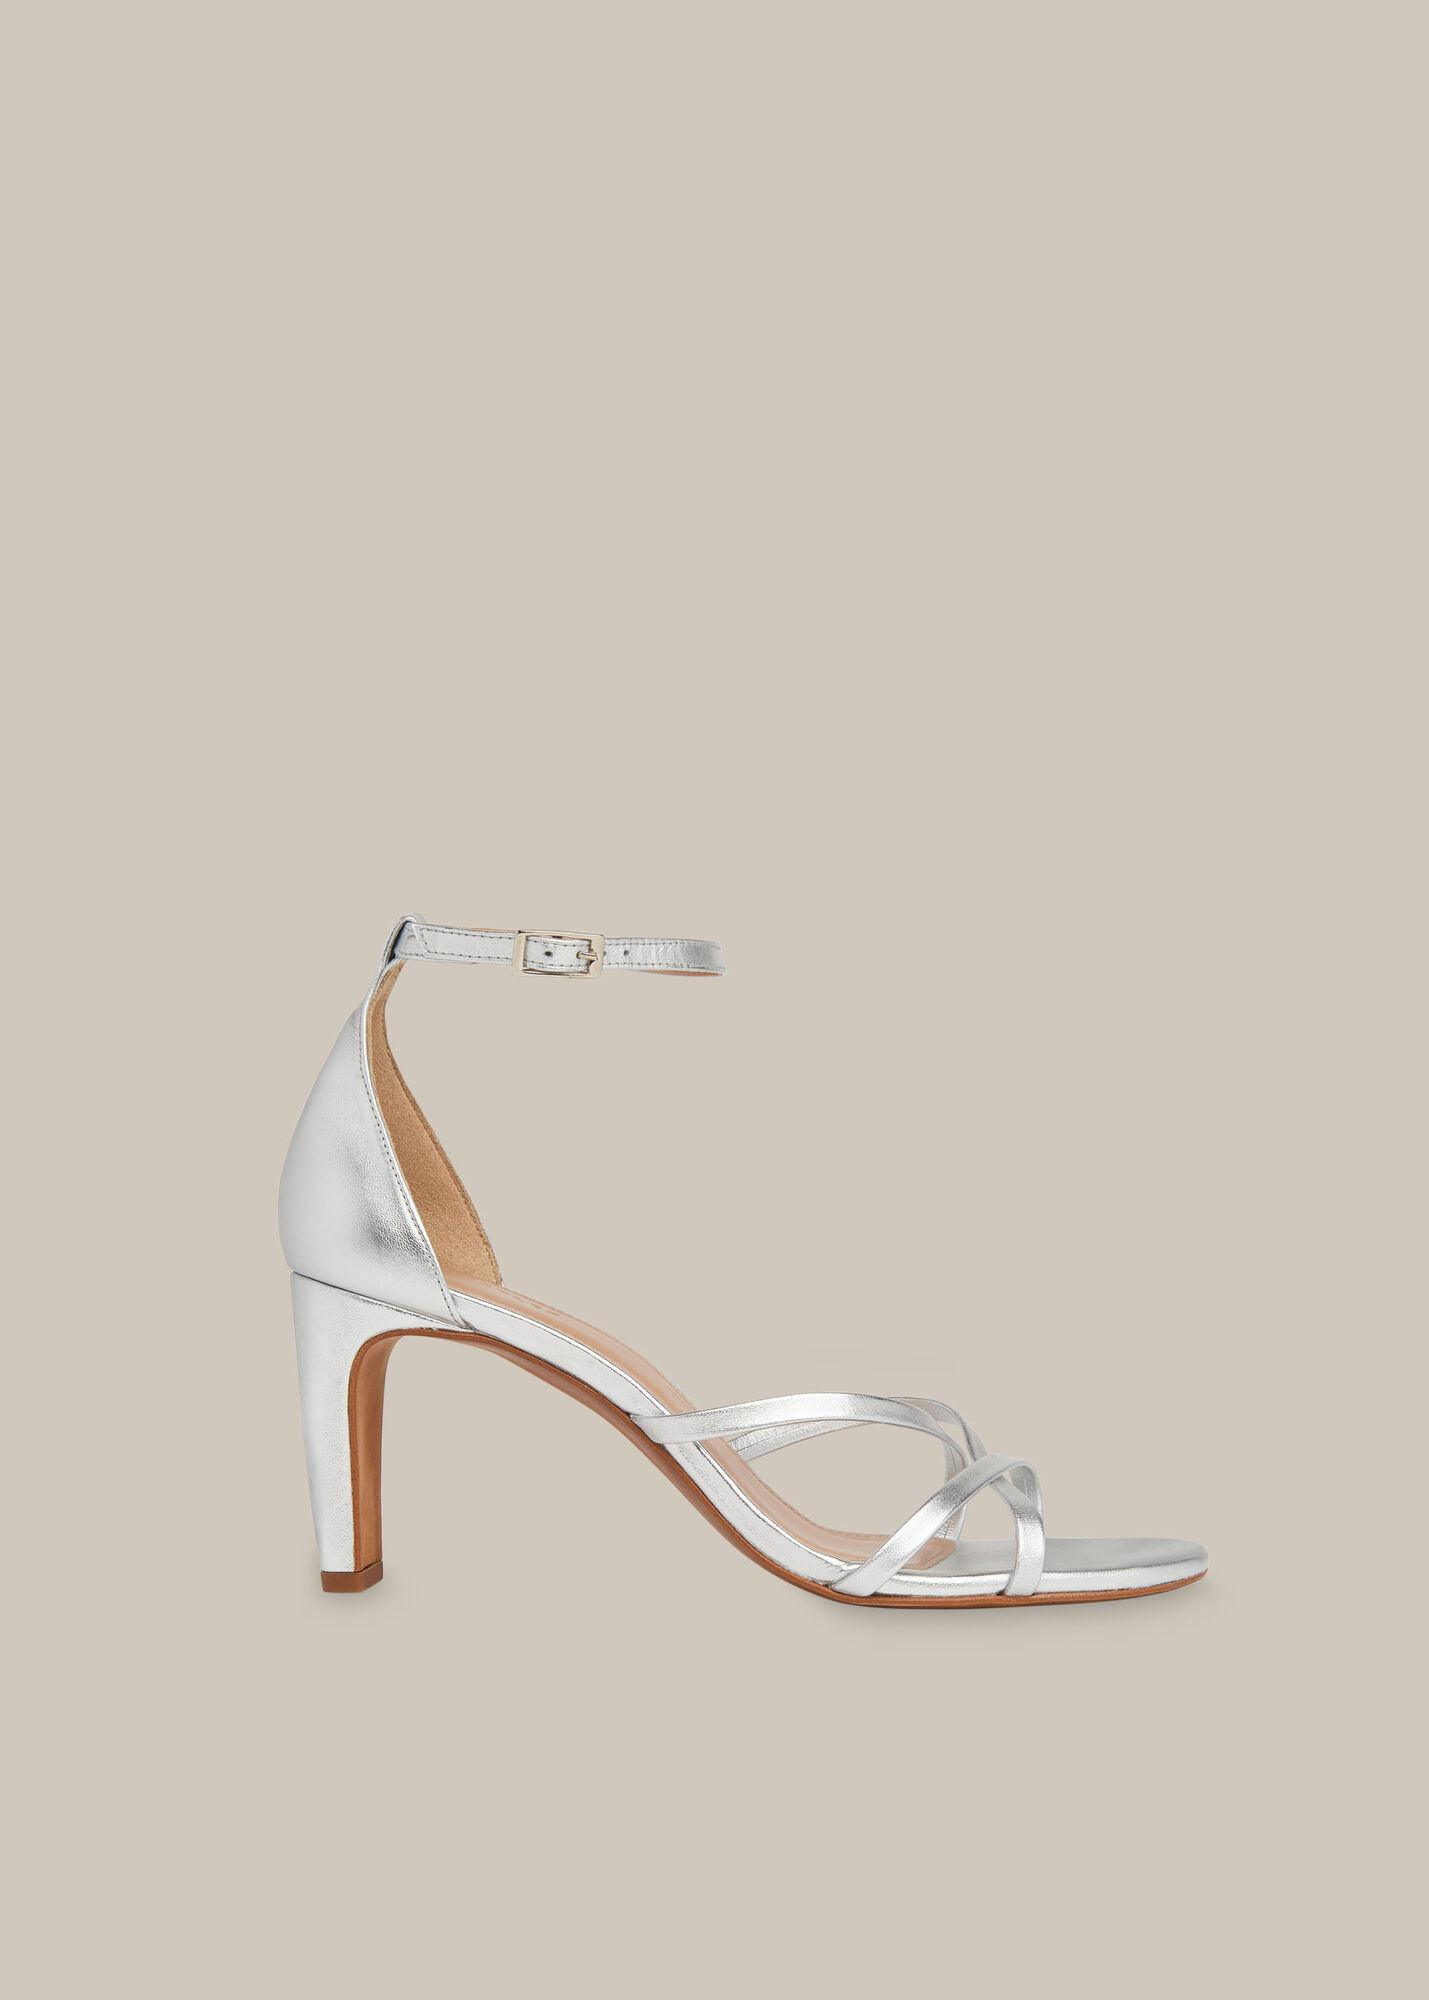 Silver Hallie Strappy High Sandal | WHISTLES